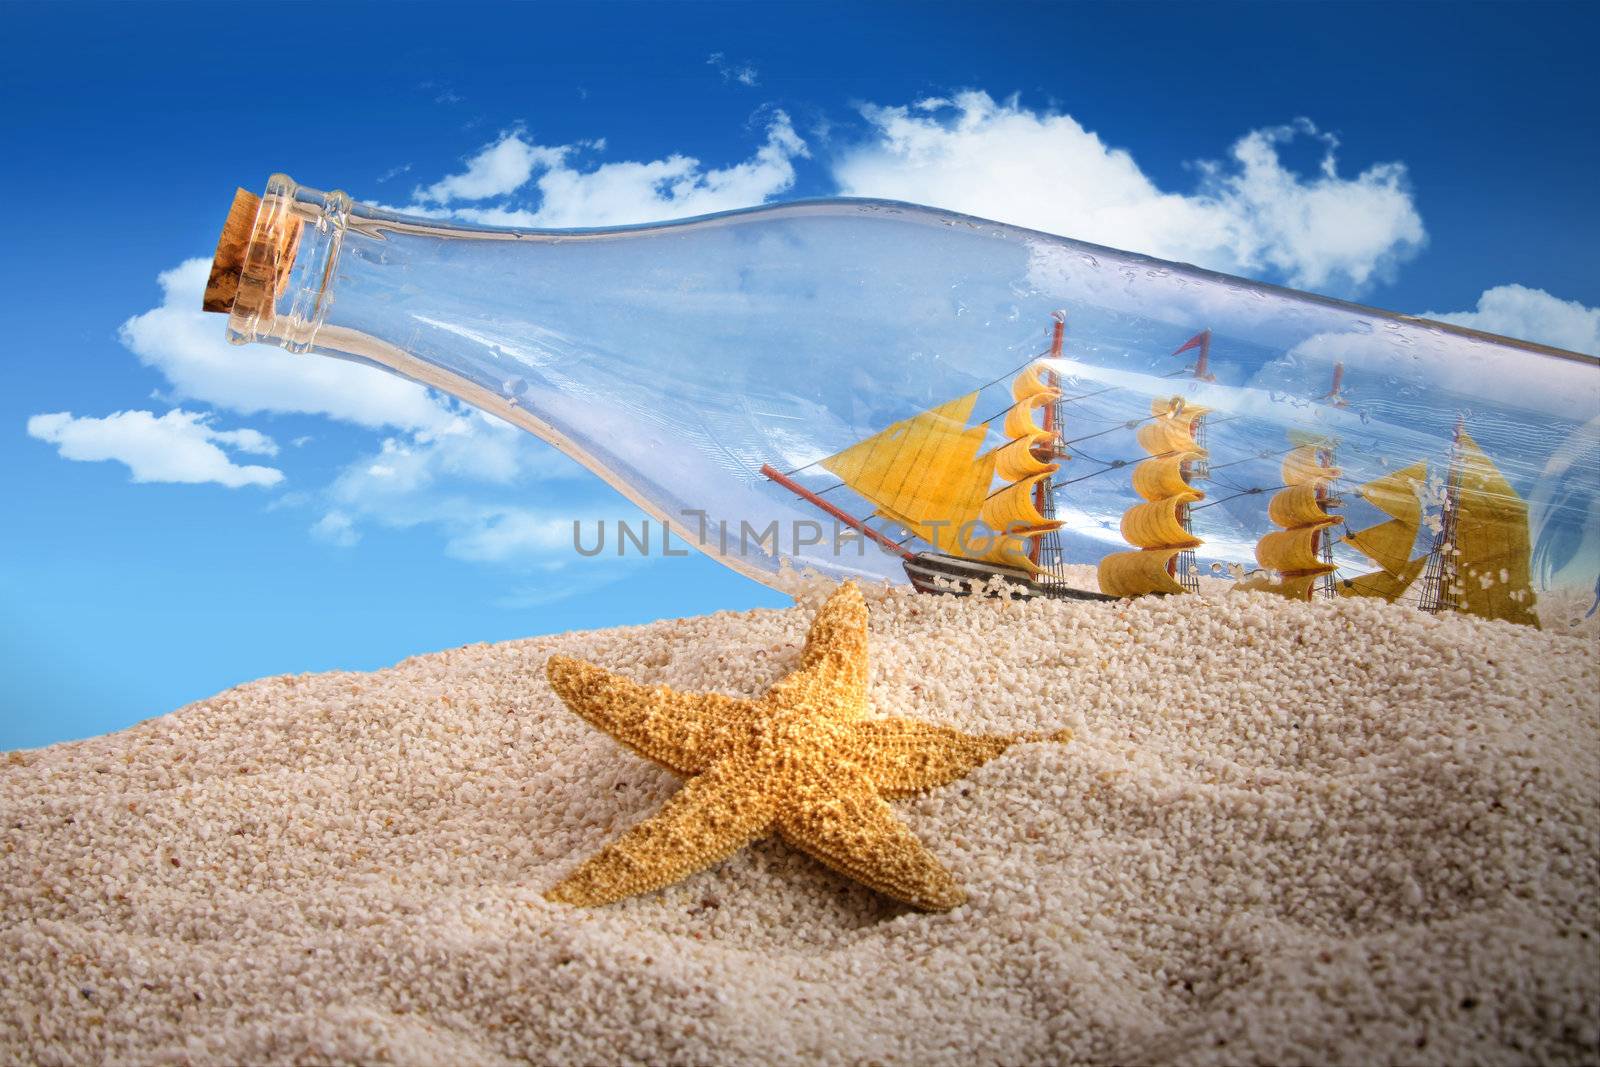 Ship in a bottle in a pile of sand  by Sandralise